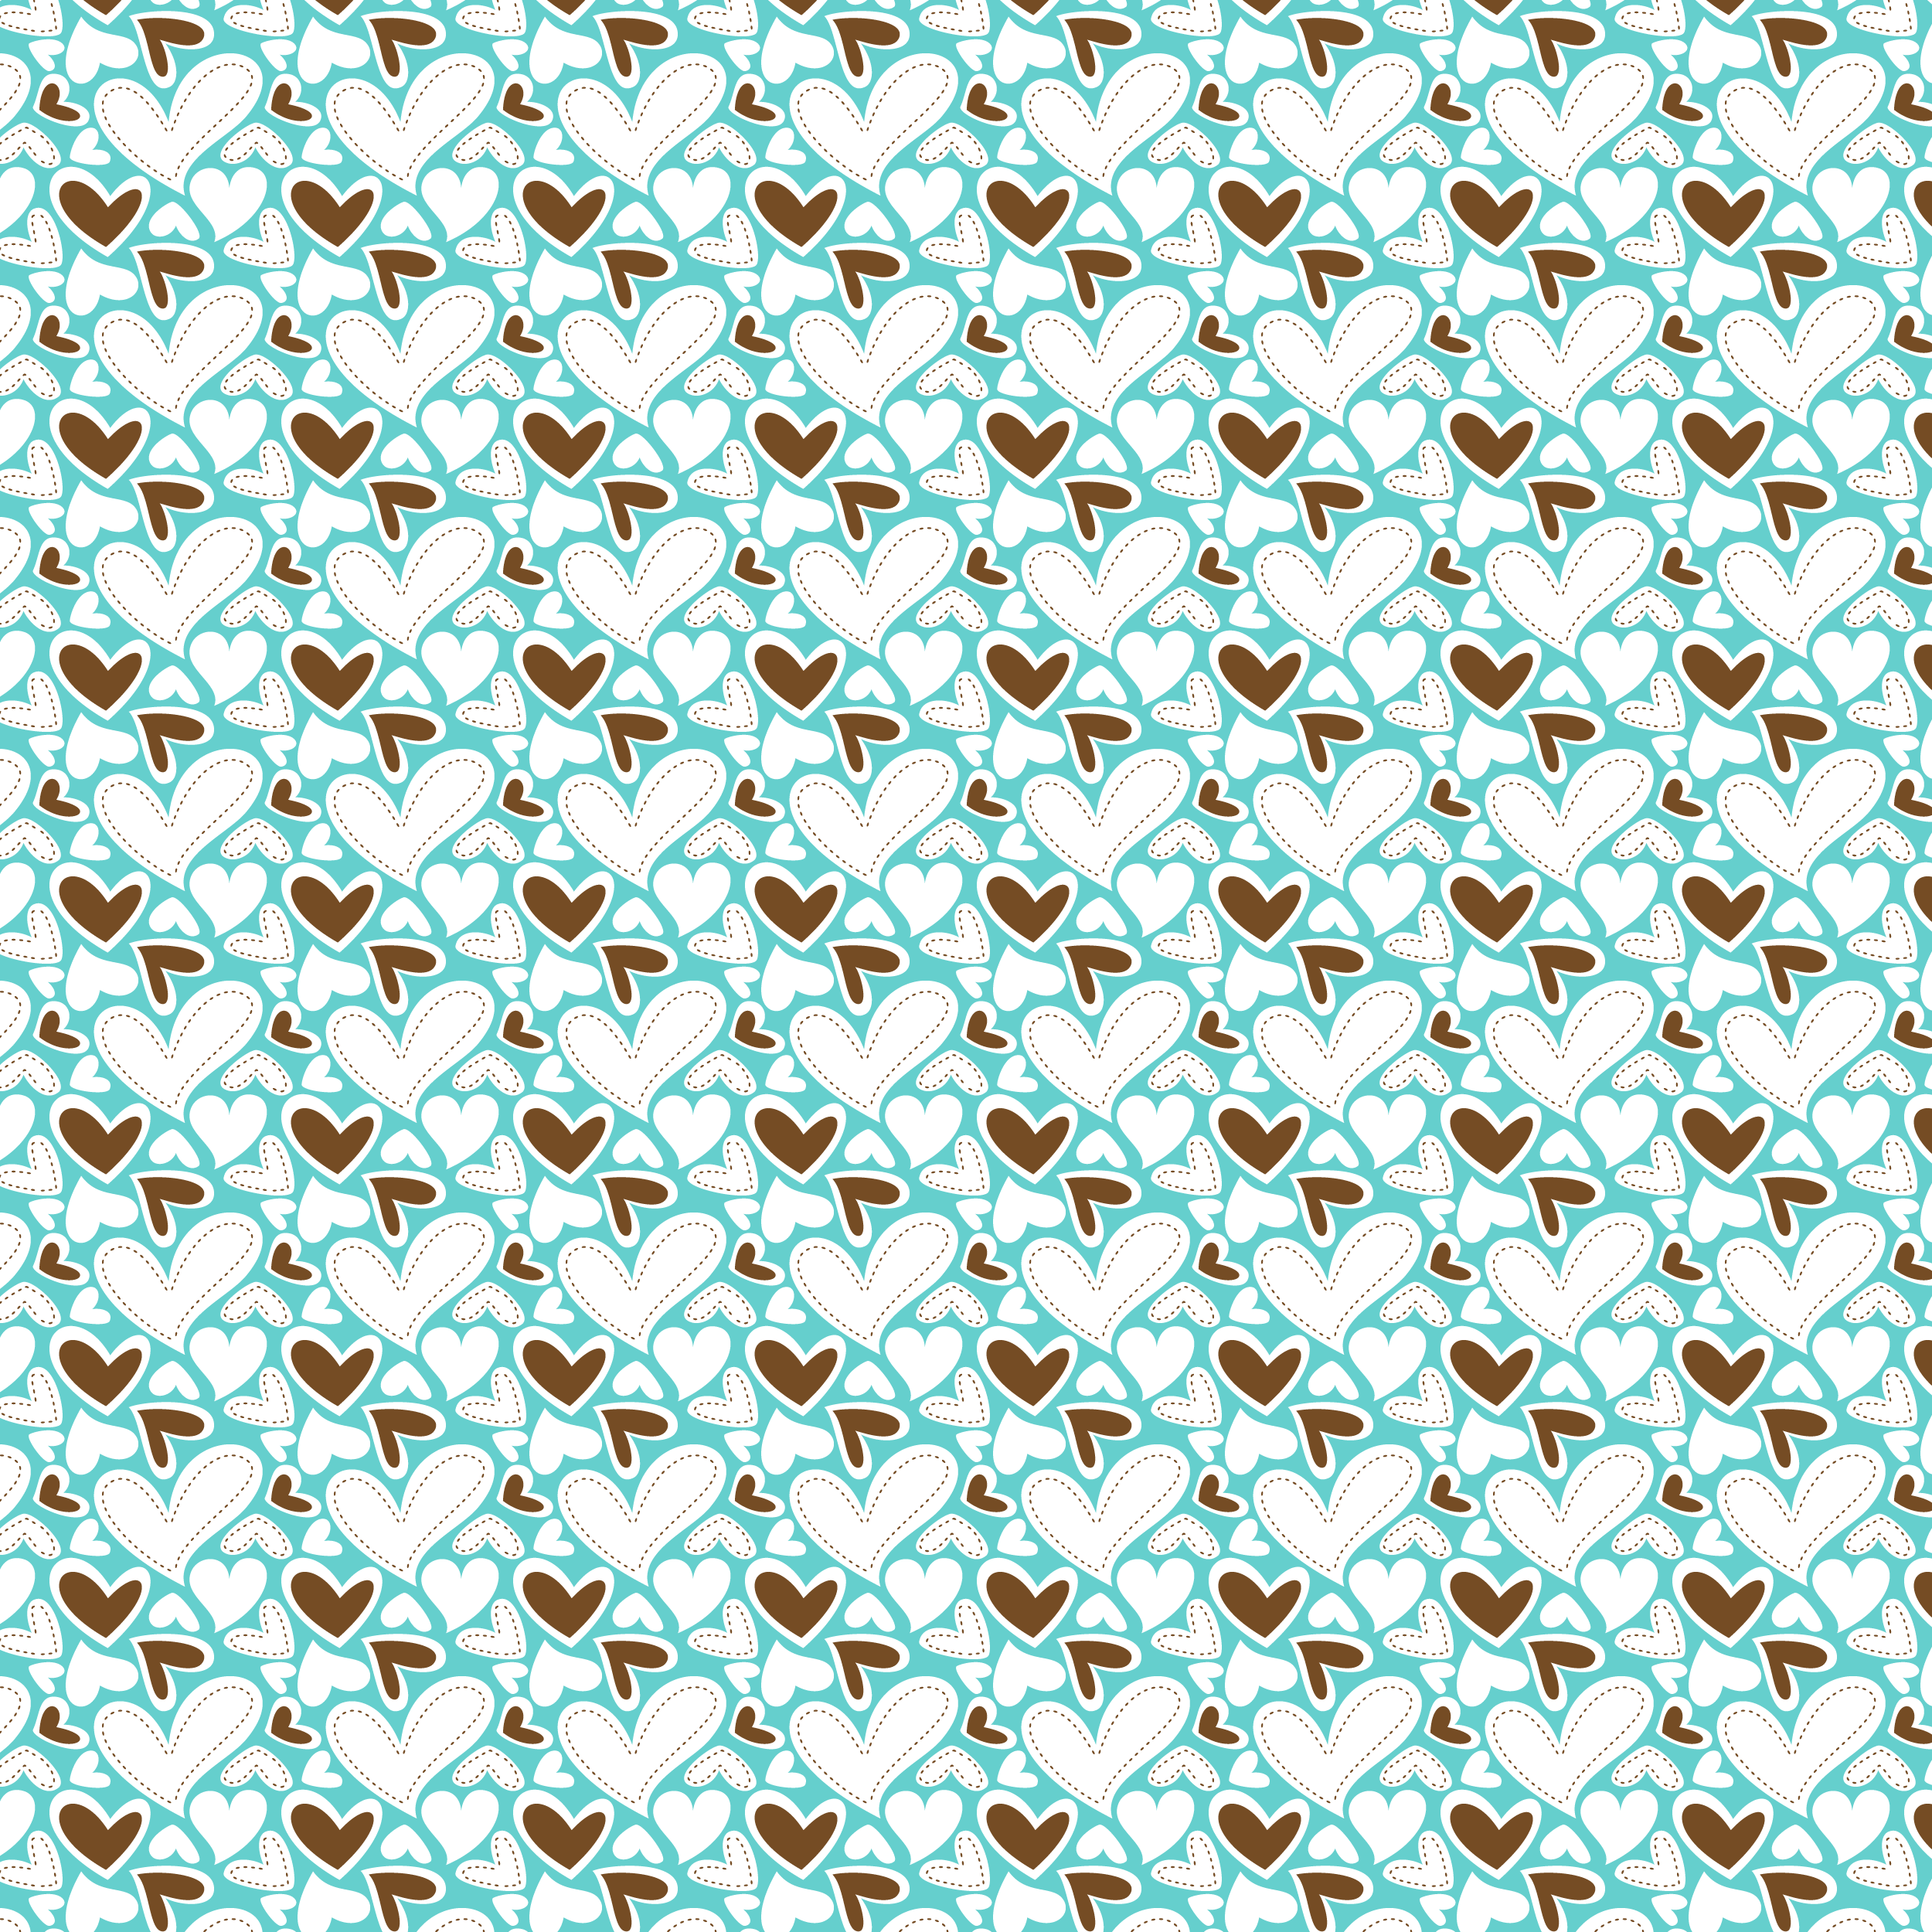 FabNFree-3111-StitchyHearts-TurquoiseBrown-Paper